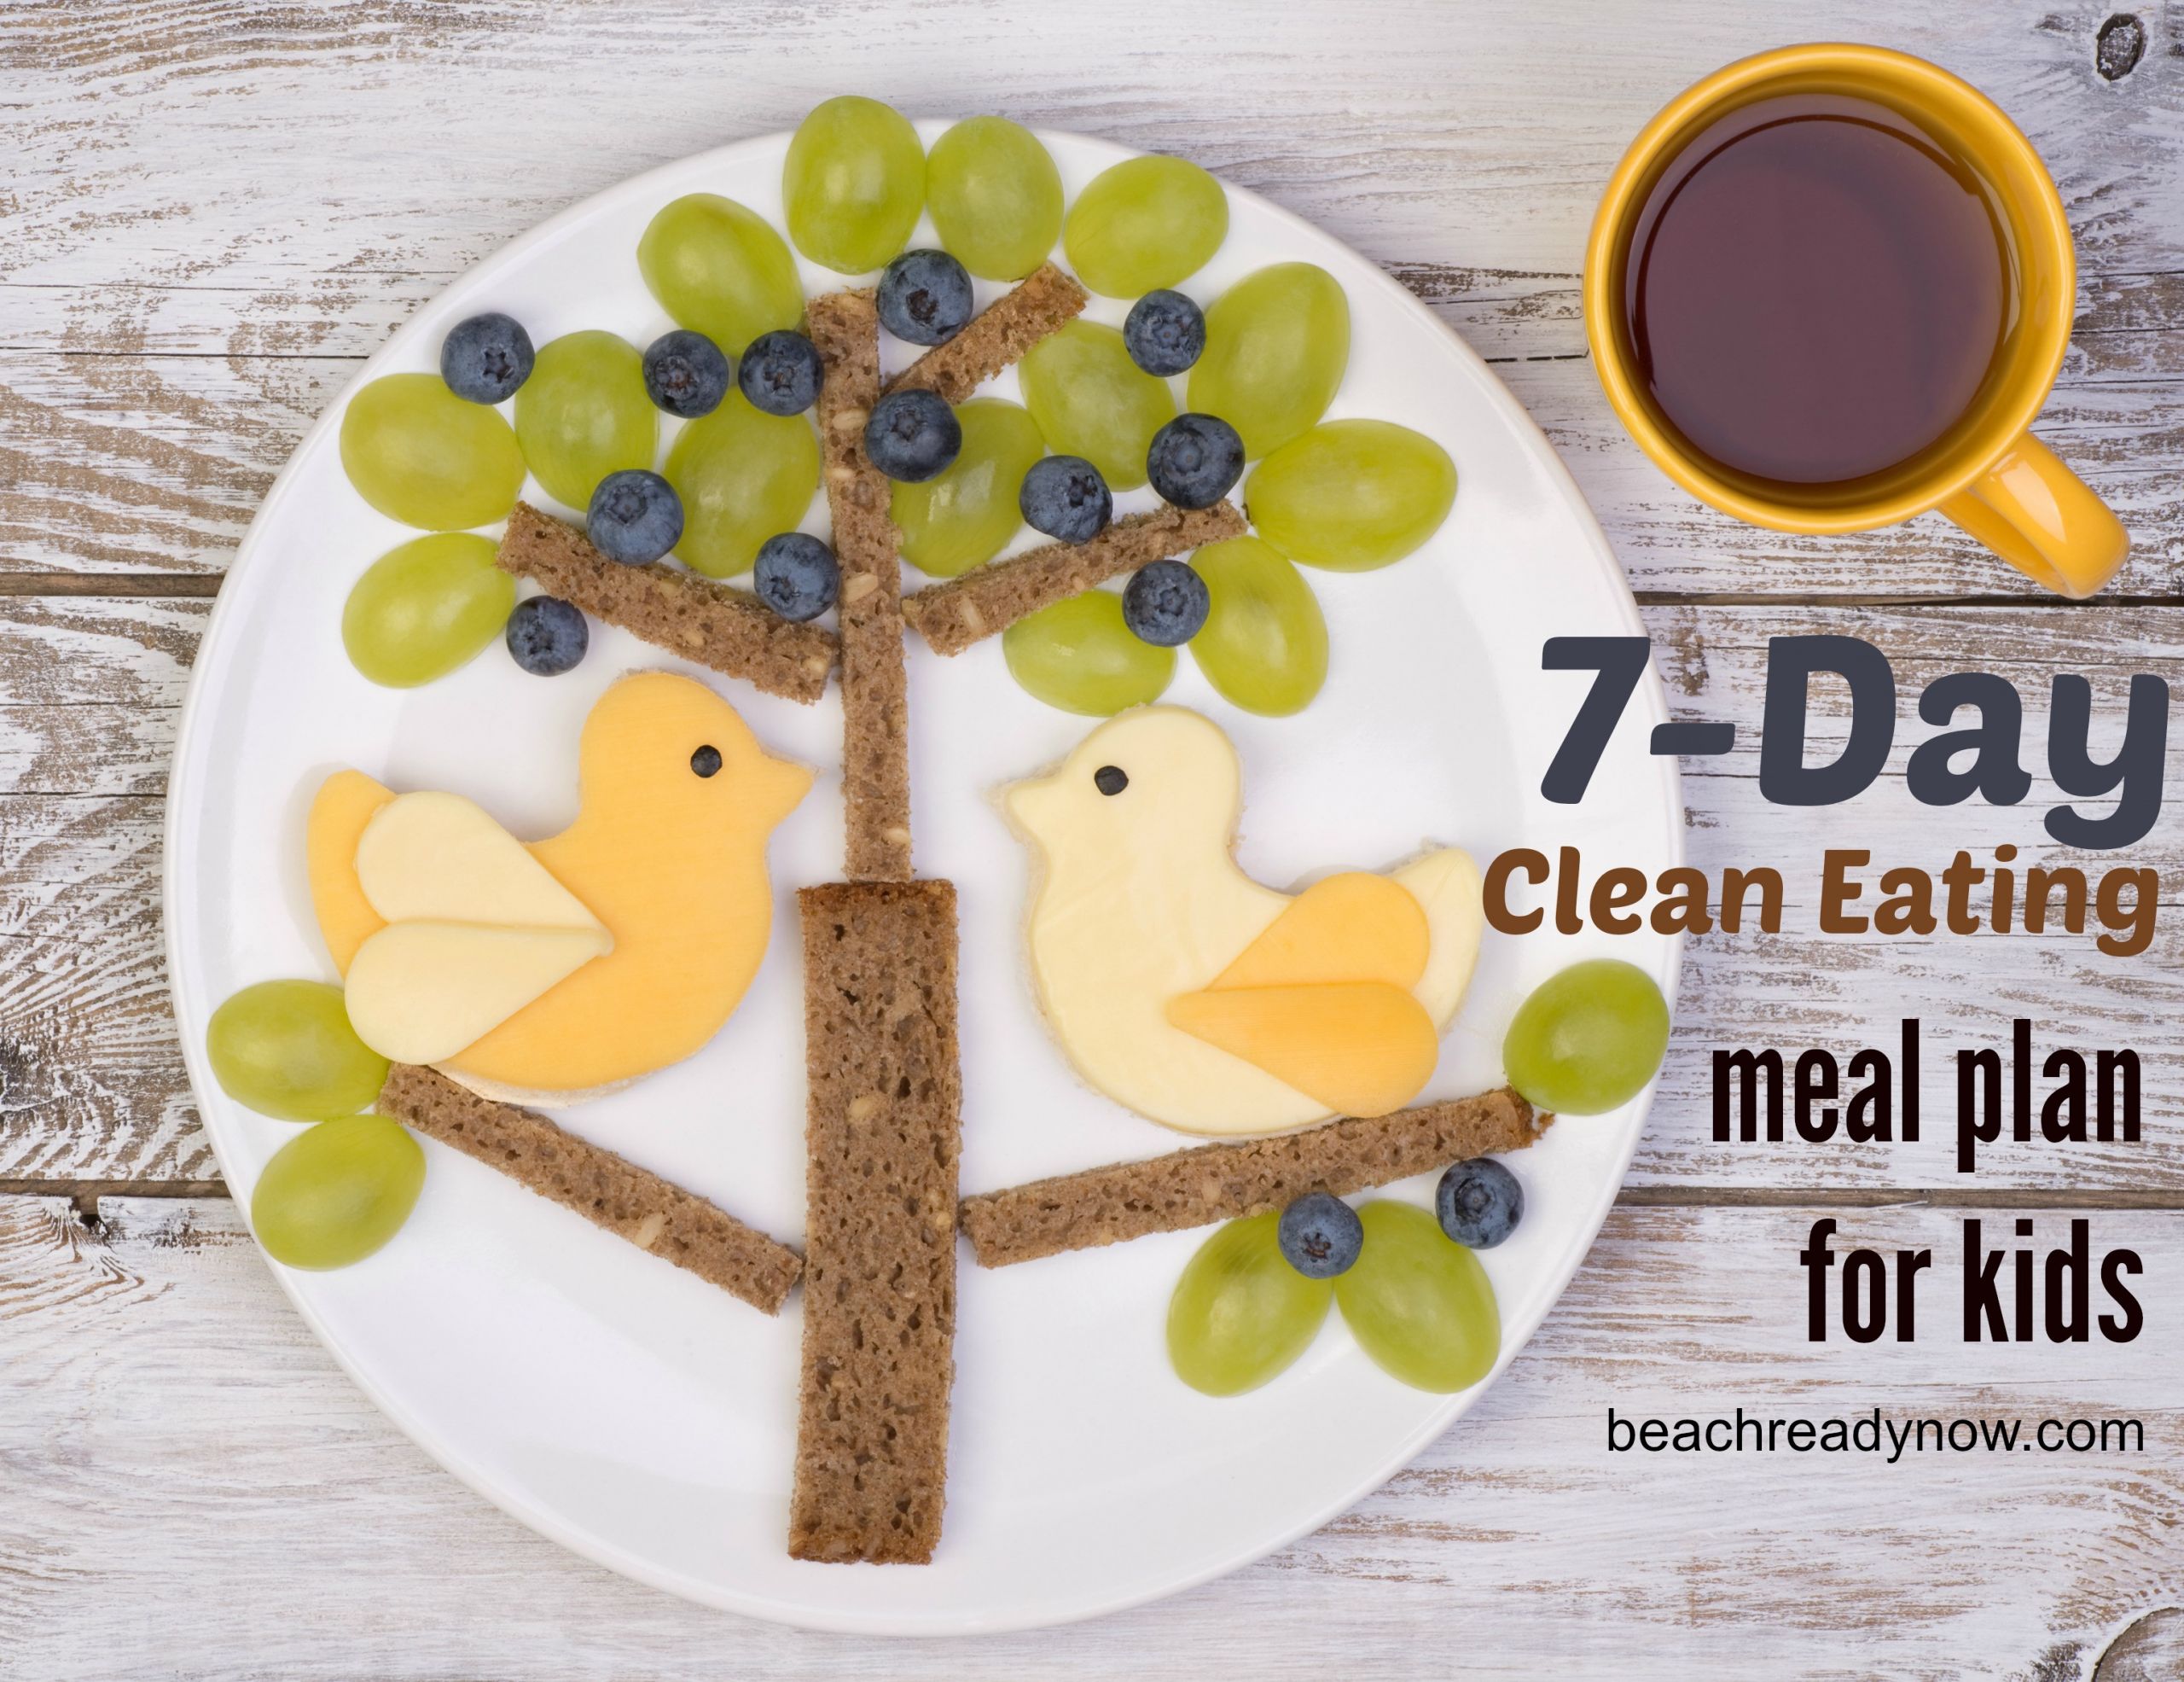 Clean Eating For Kids
 7 Day Clean Eating Meal Plan for Kids Beach Ready Now